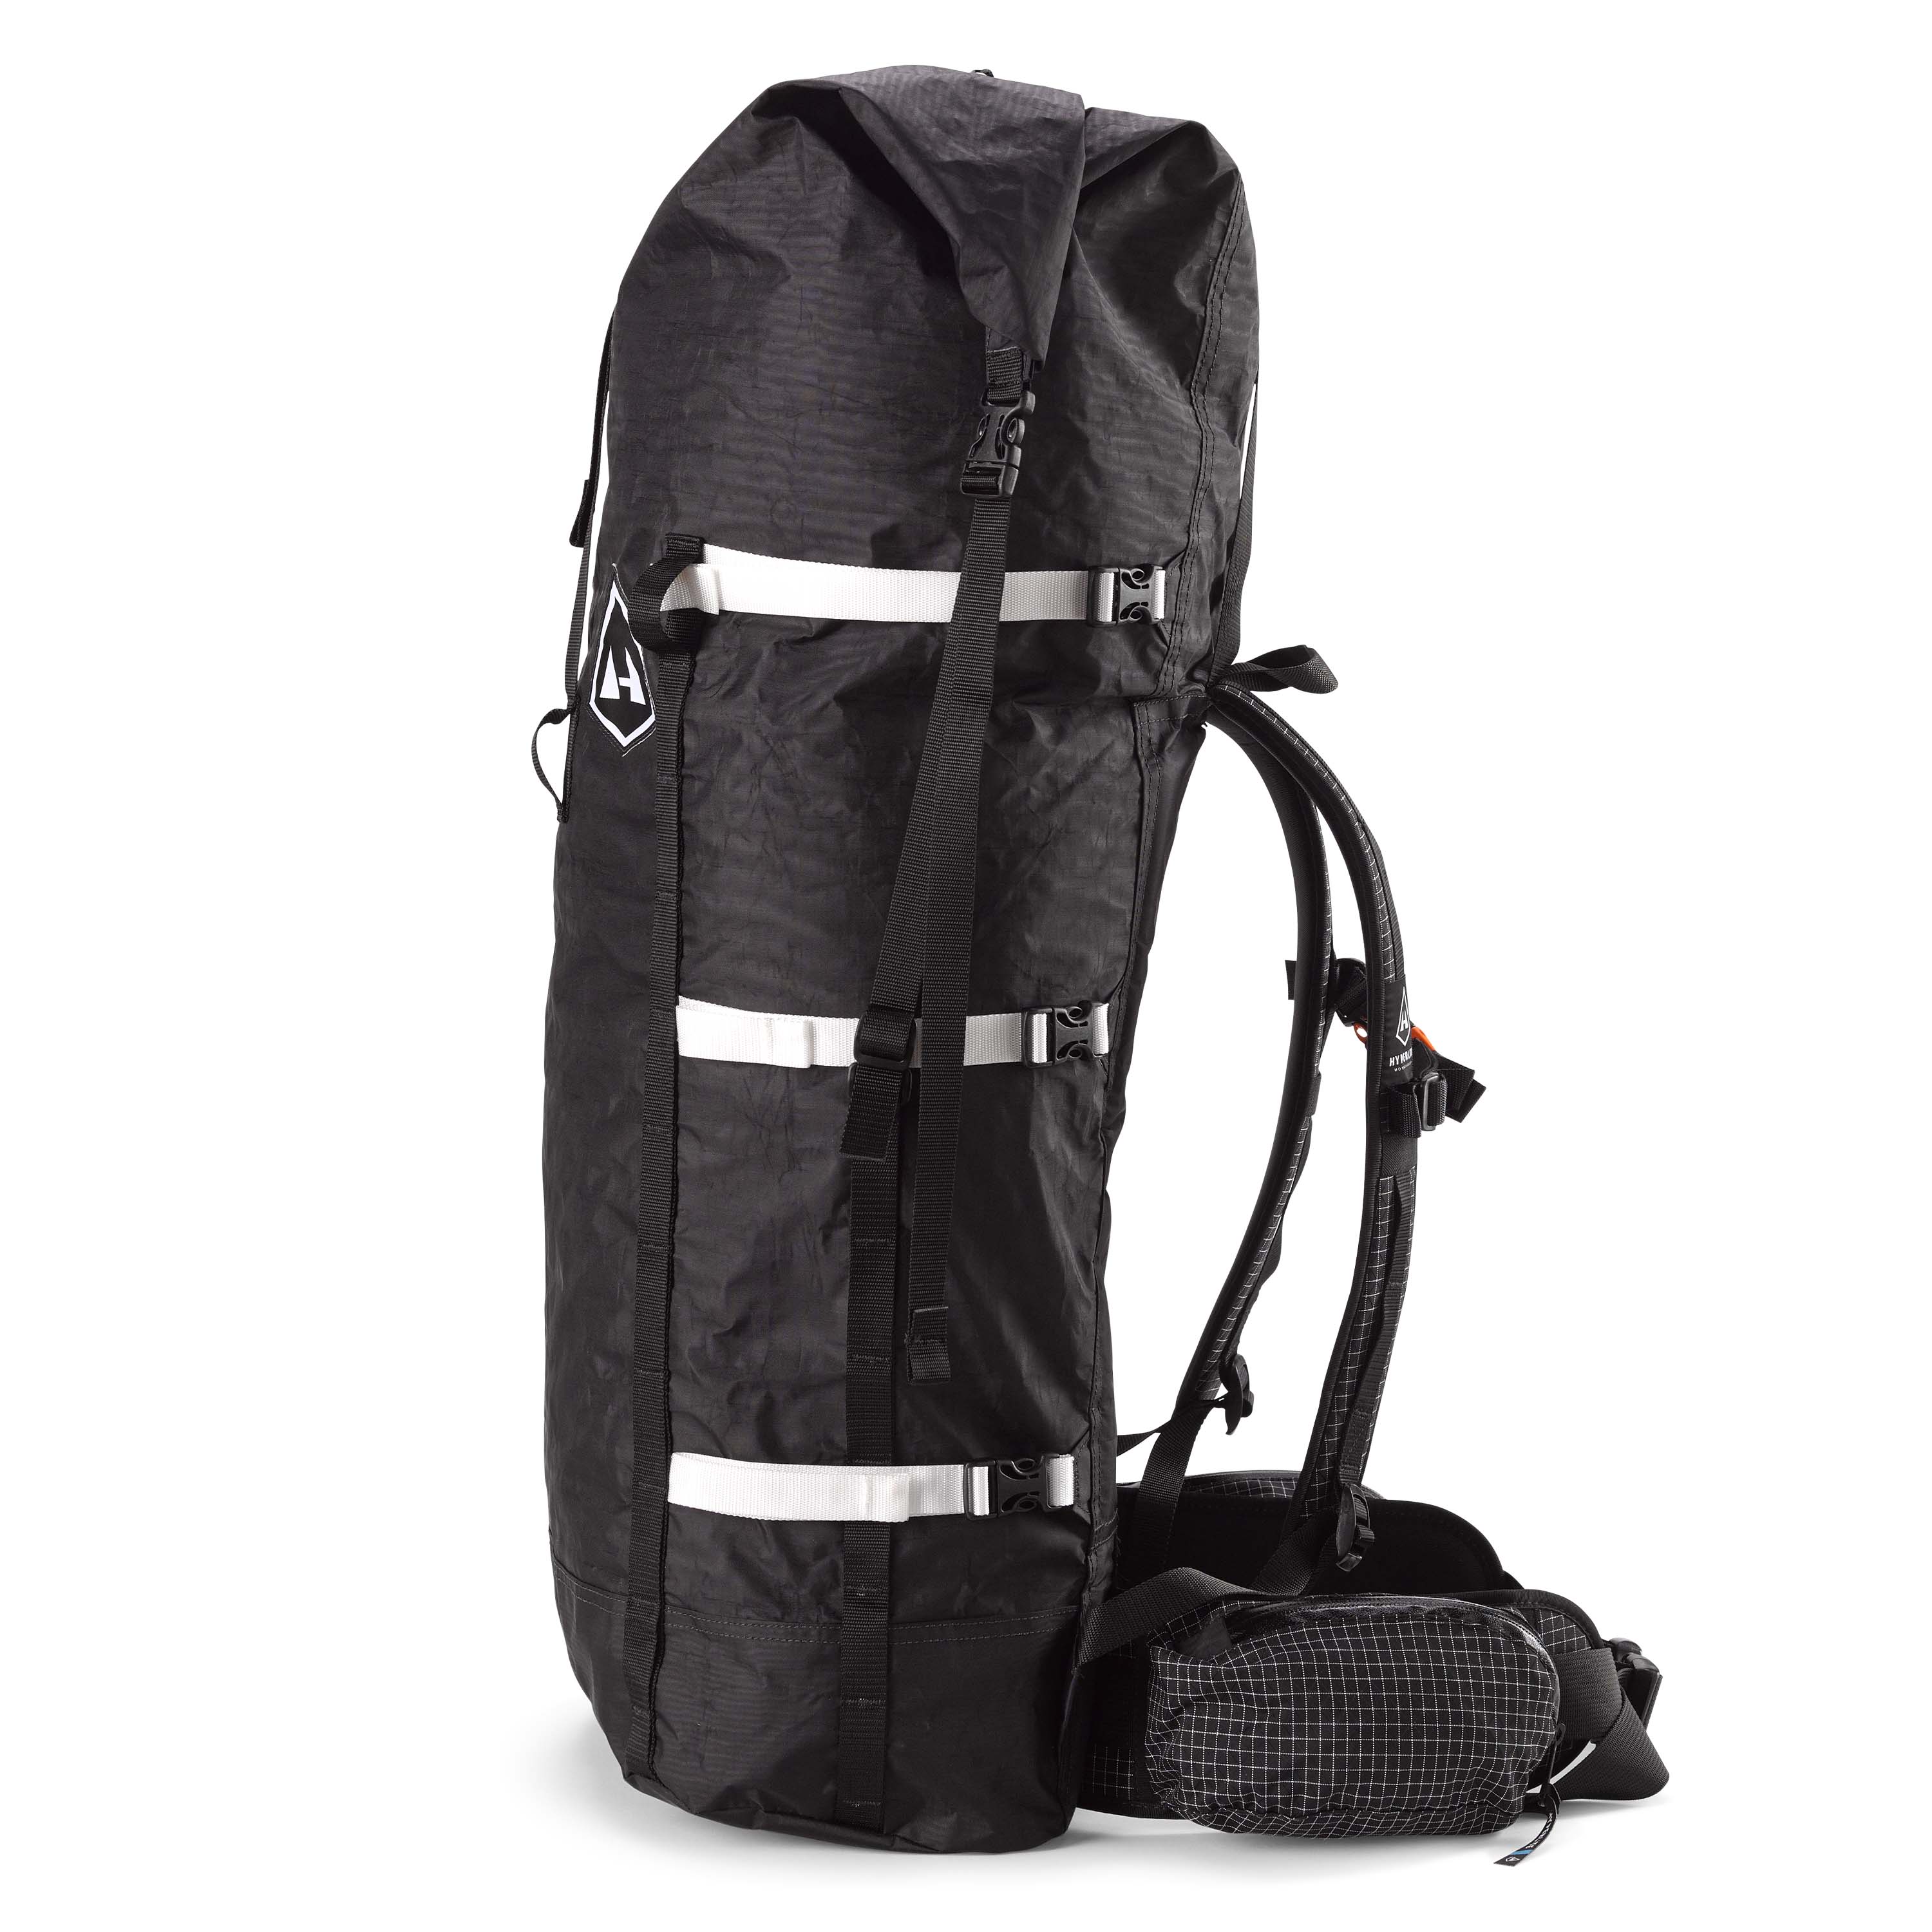 MOUNTAINTOP® 80L Internal Frame Backpack with Rain Cover